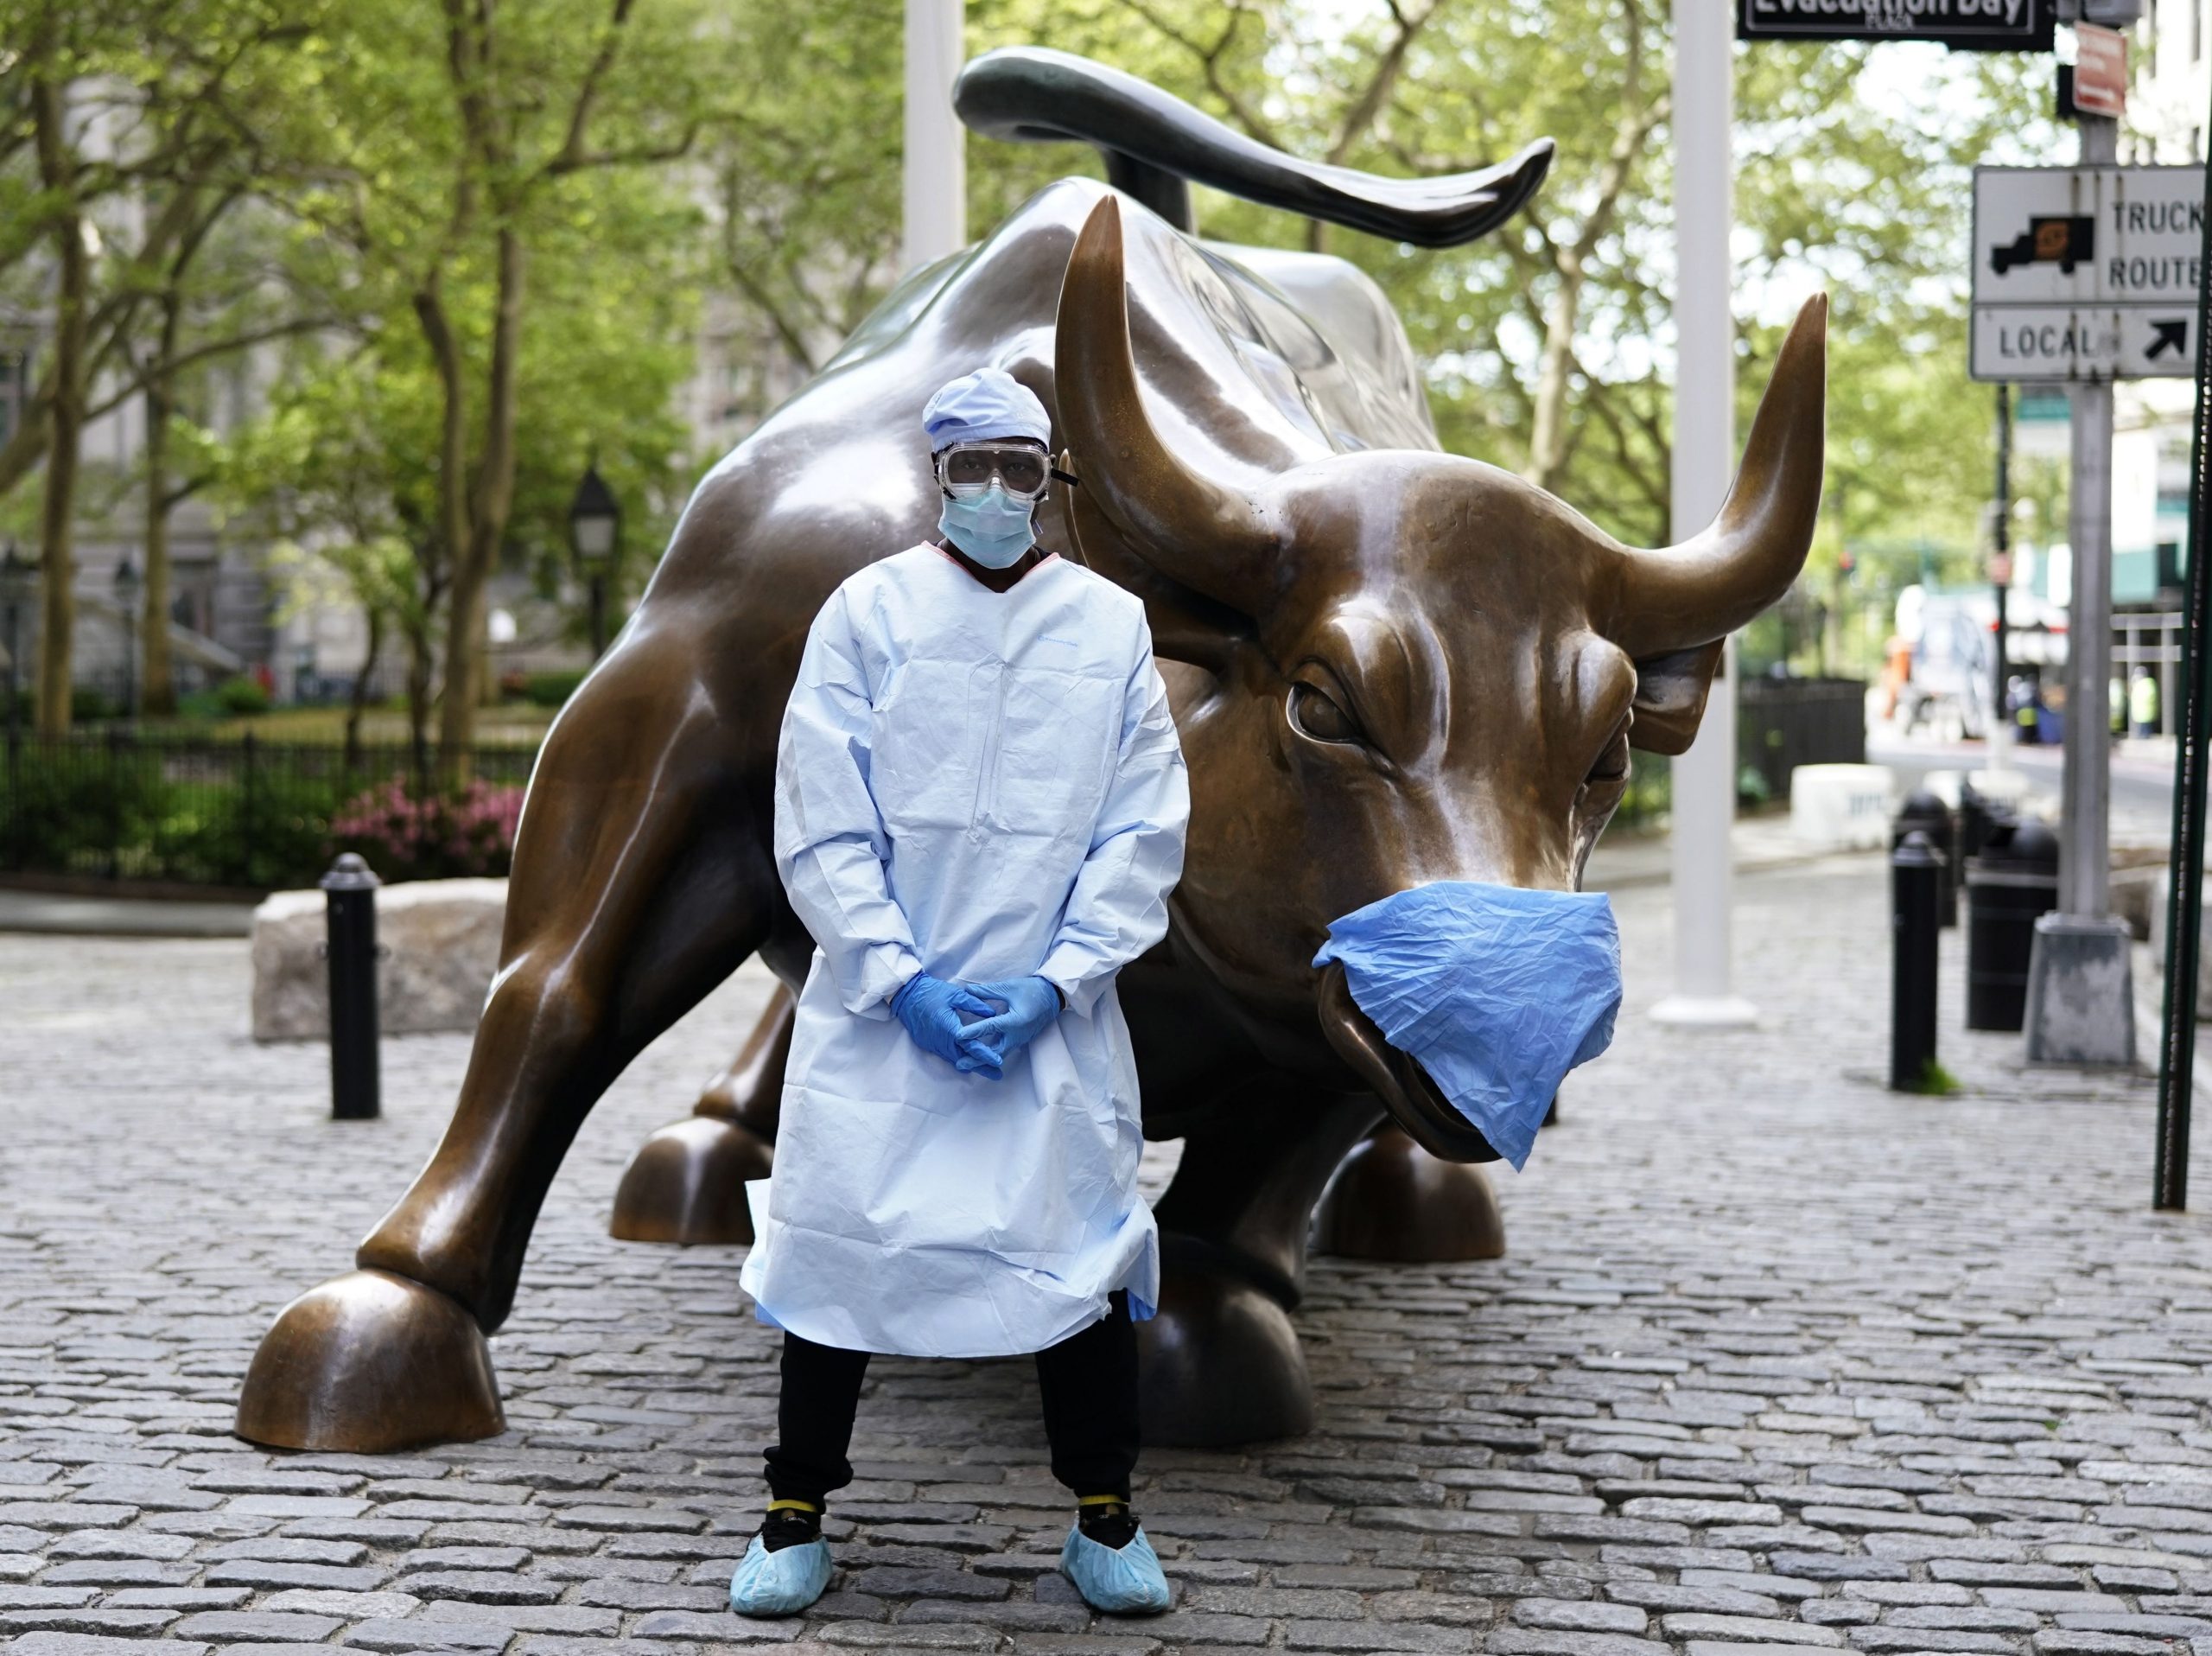 Julius Shakari, from California in full PPE gear, takes photos with his friend in front of the Charging Bull